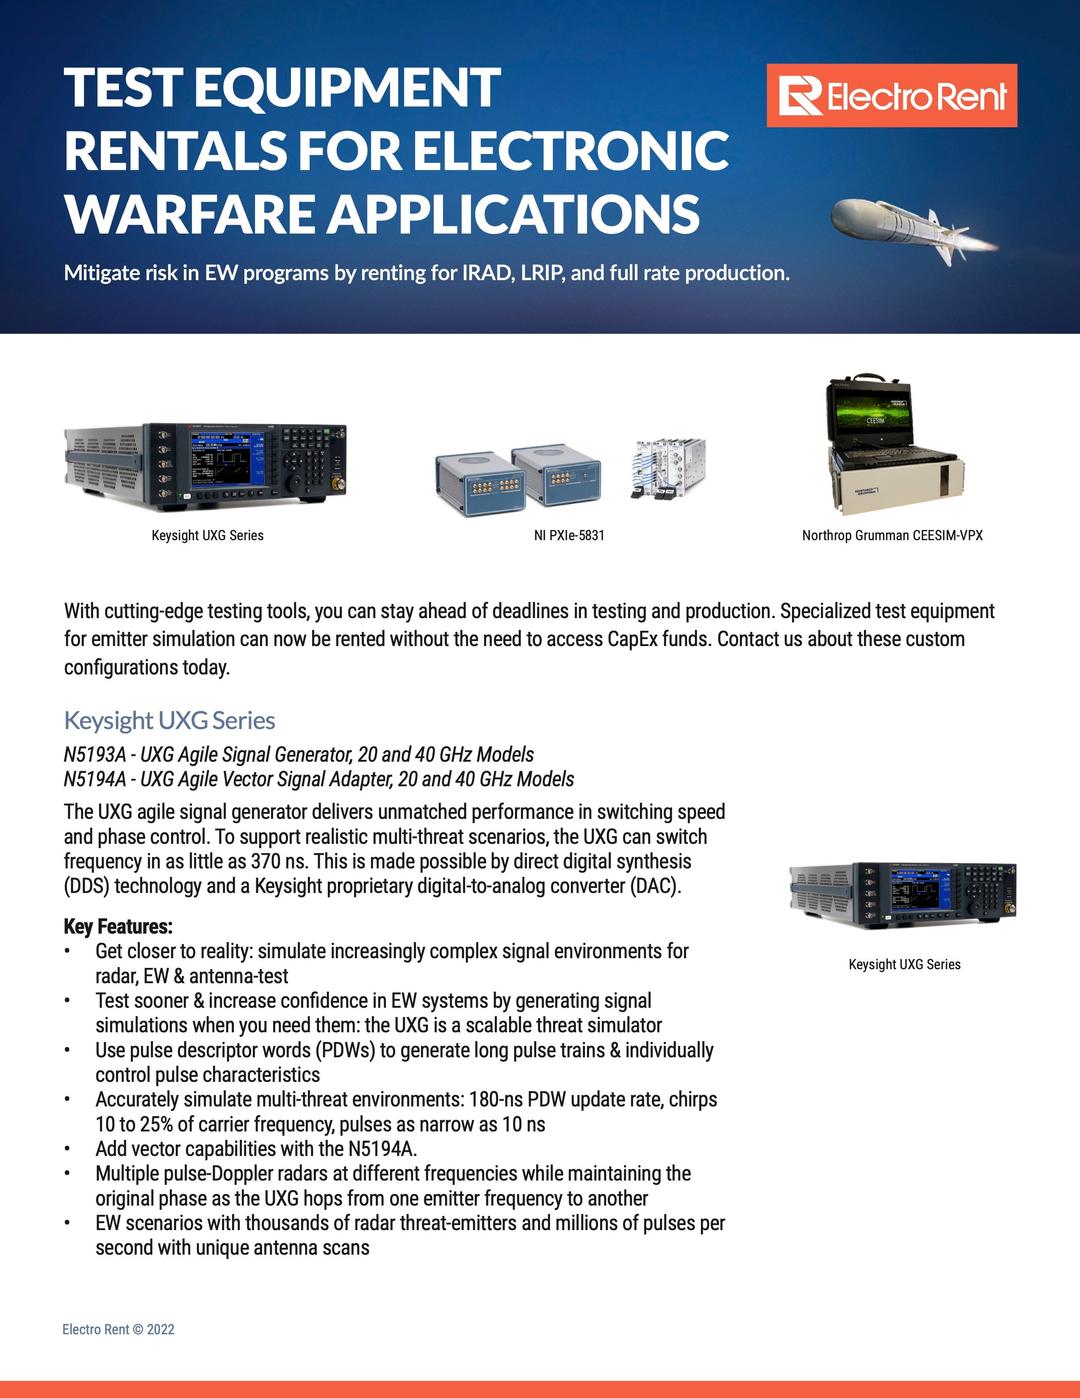 Test Equipment Rentals for Electronic Warfare, image